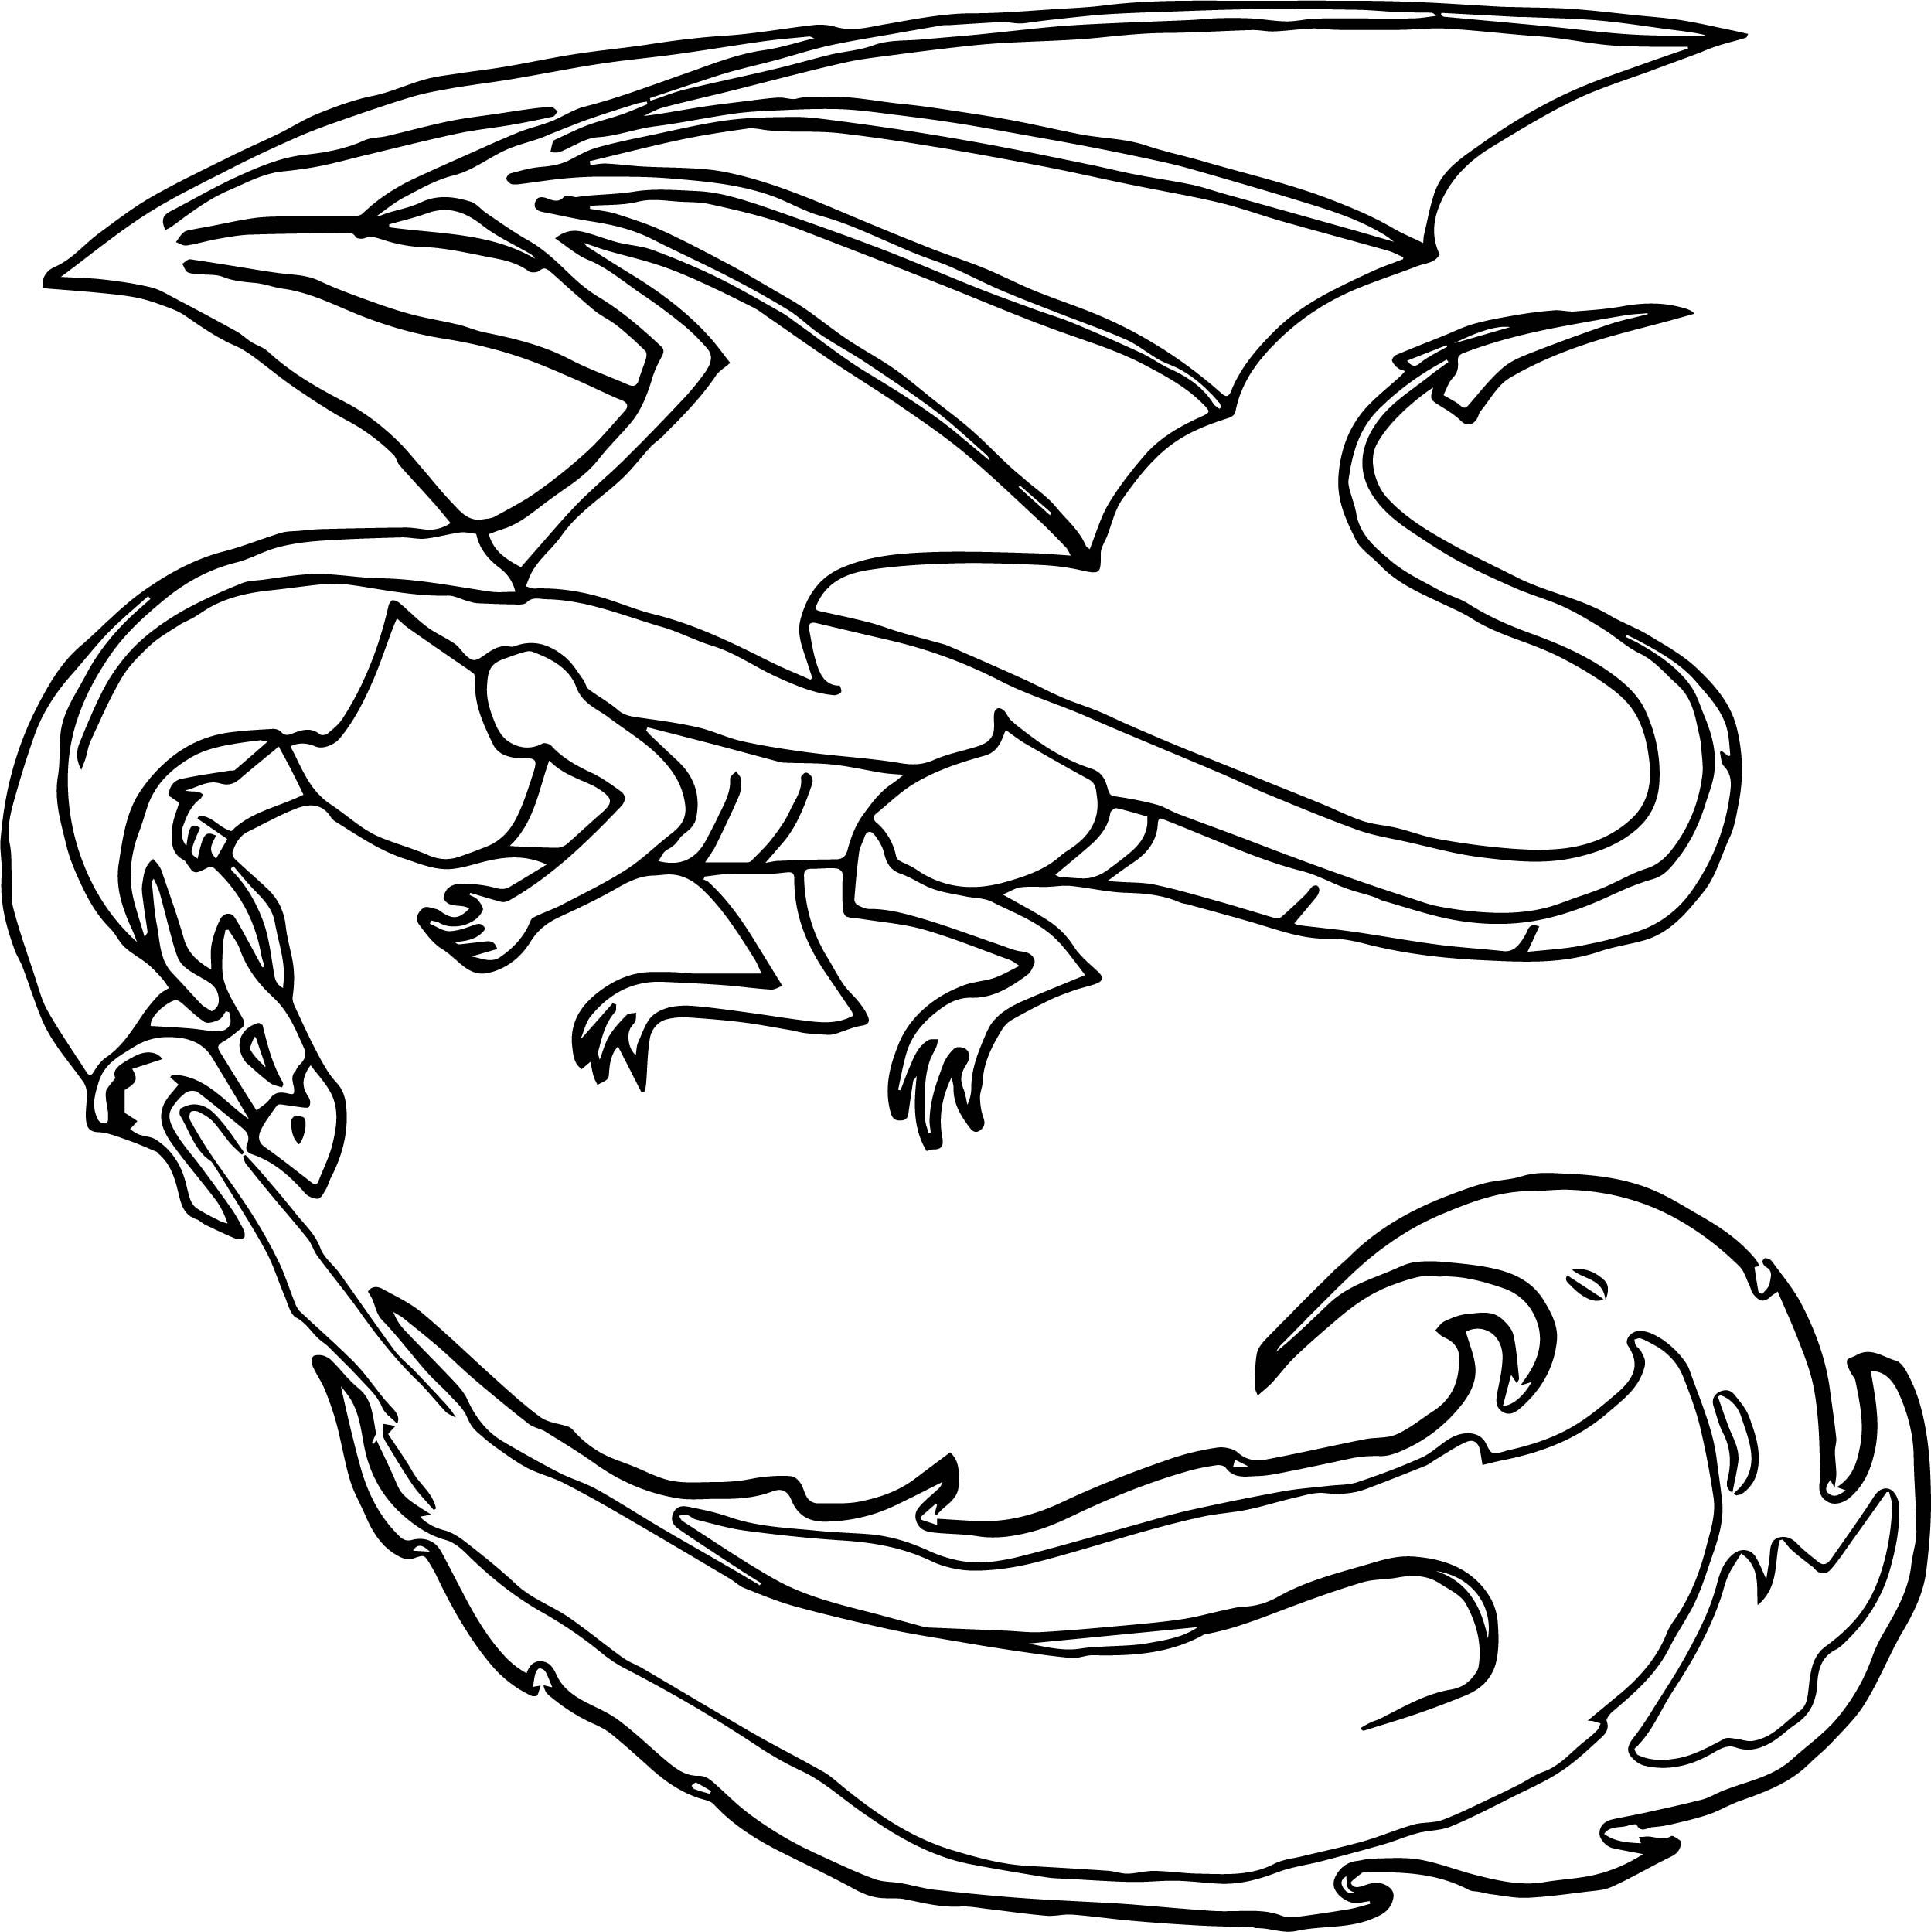 Dragon fire coloring page